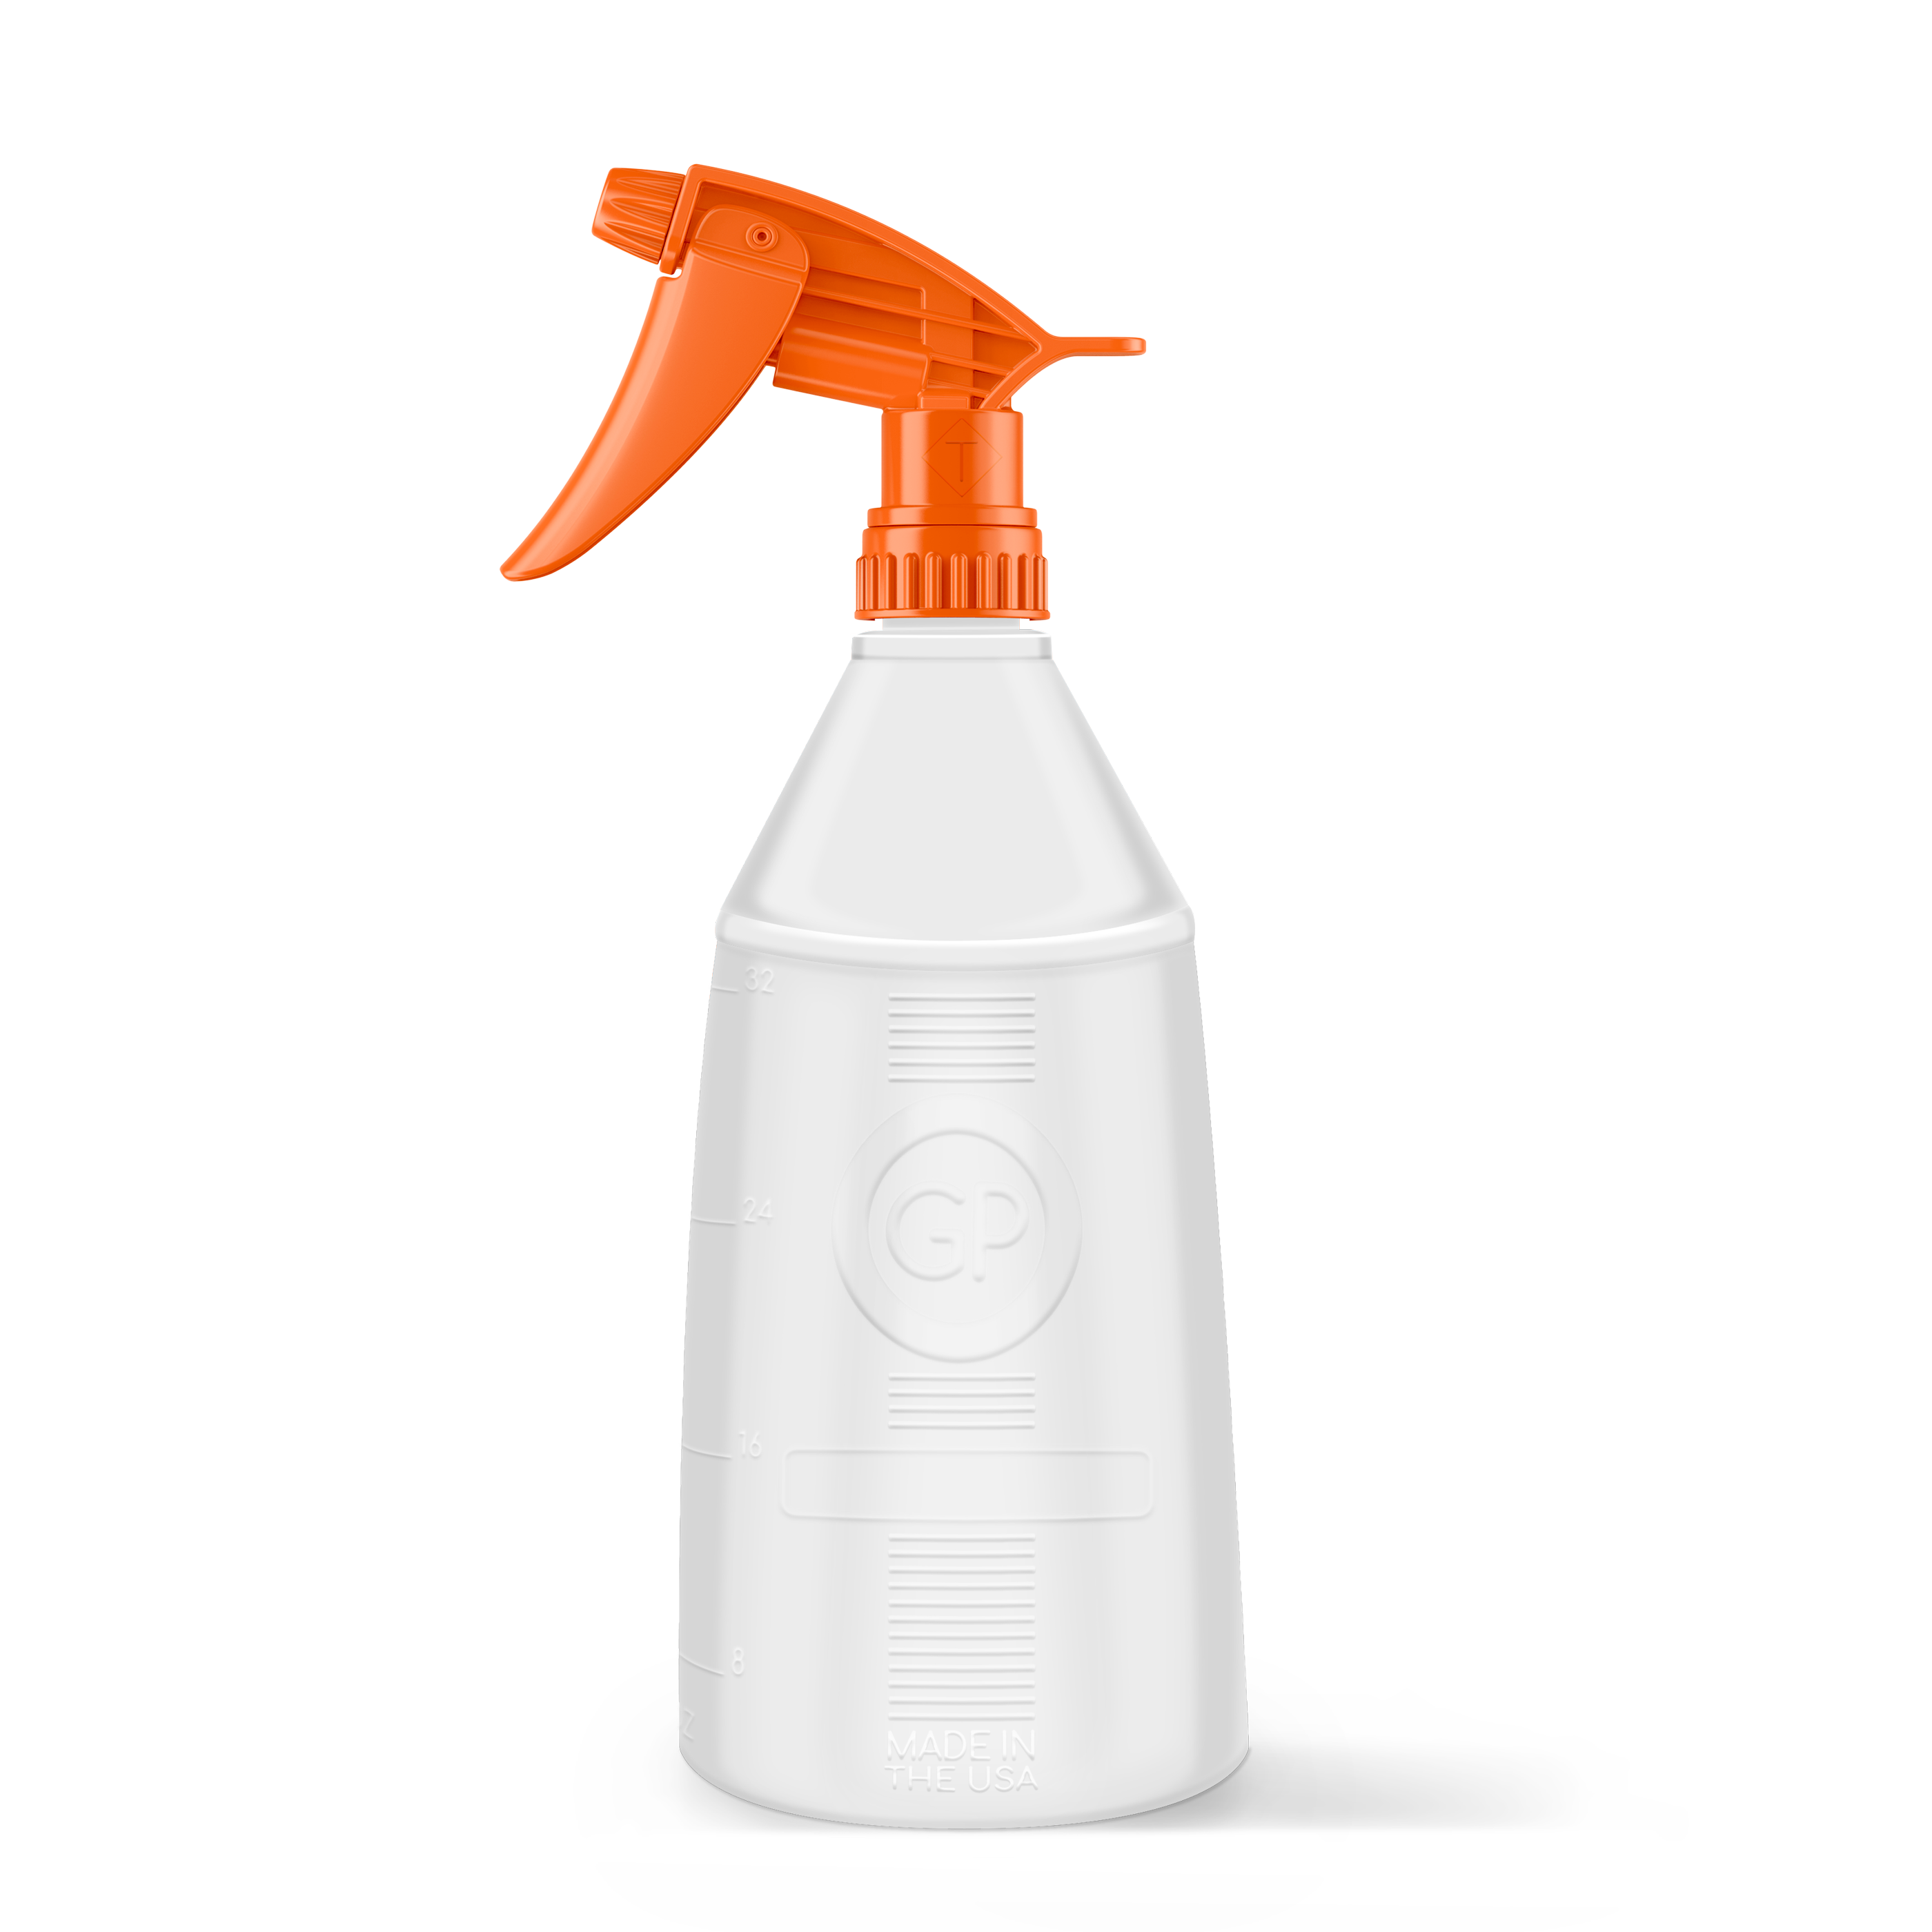 Chemical Spray Bottle - Stainless Steel - 1-Liter - FALCON - Adjustable  Nozzle - Controls Fumes